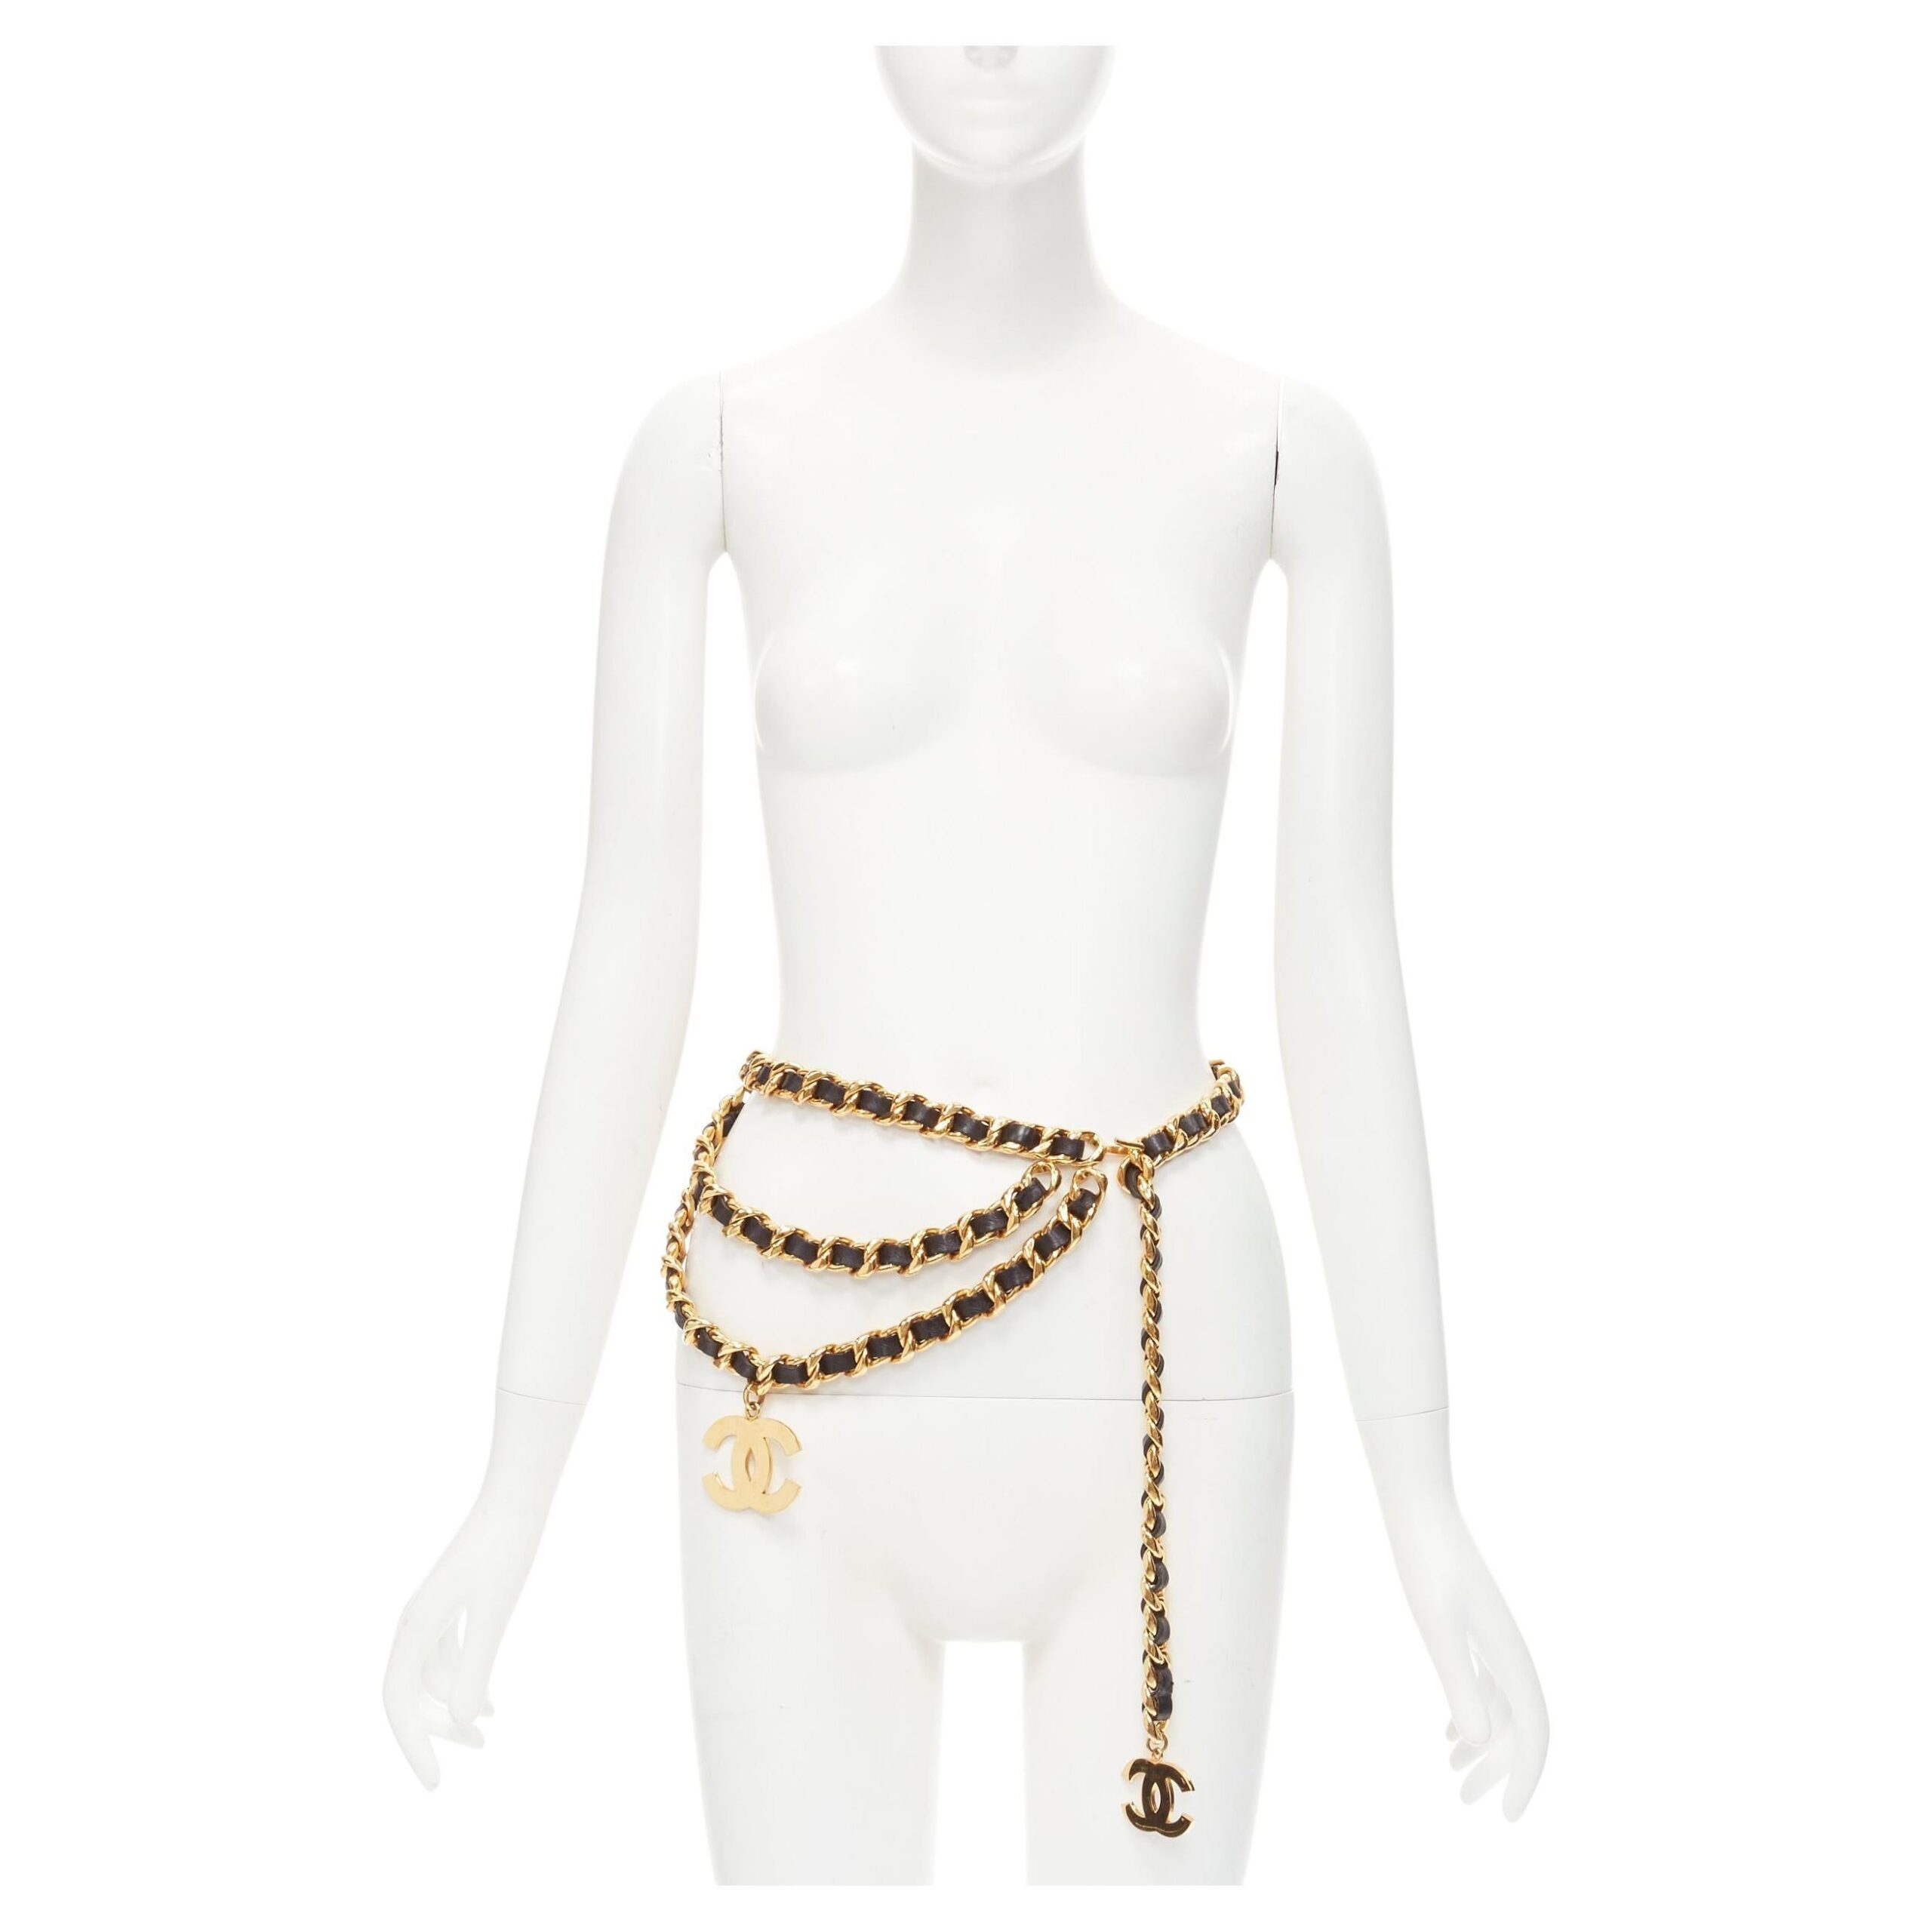 Gold Belt Designs: Timeless Elegance to Accentuate Your Waist